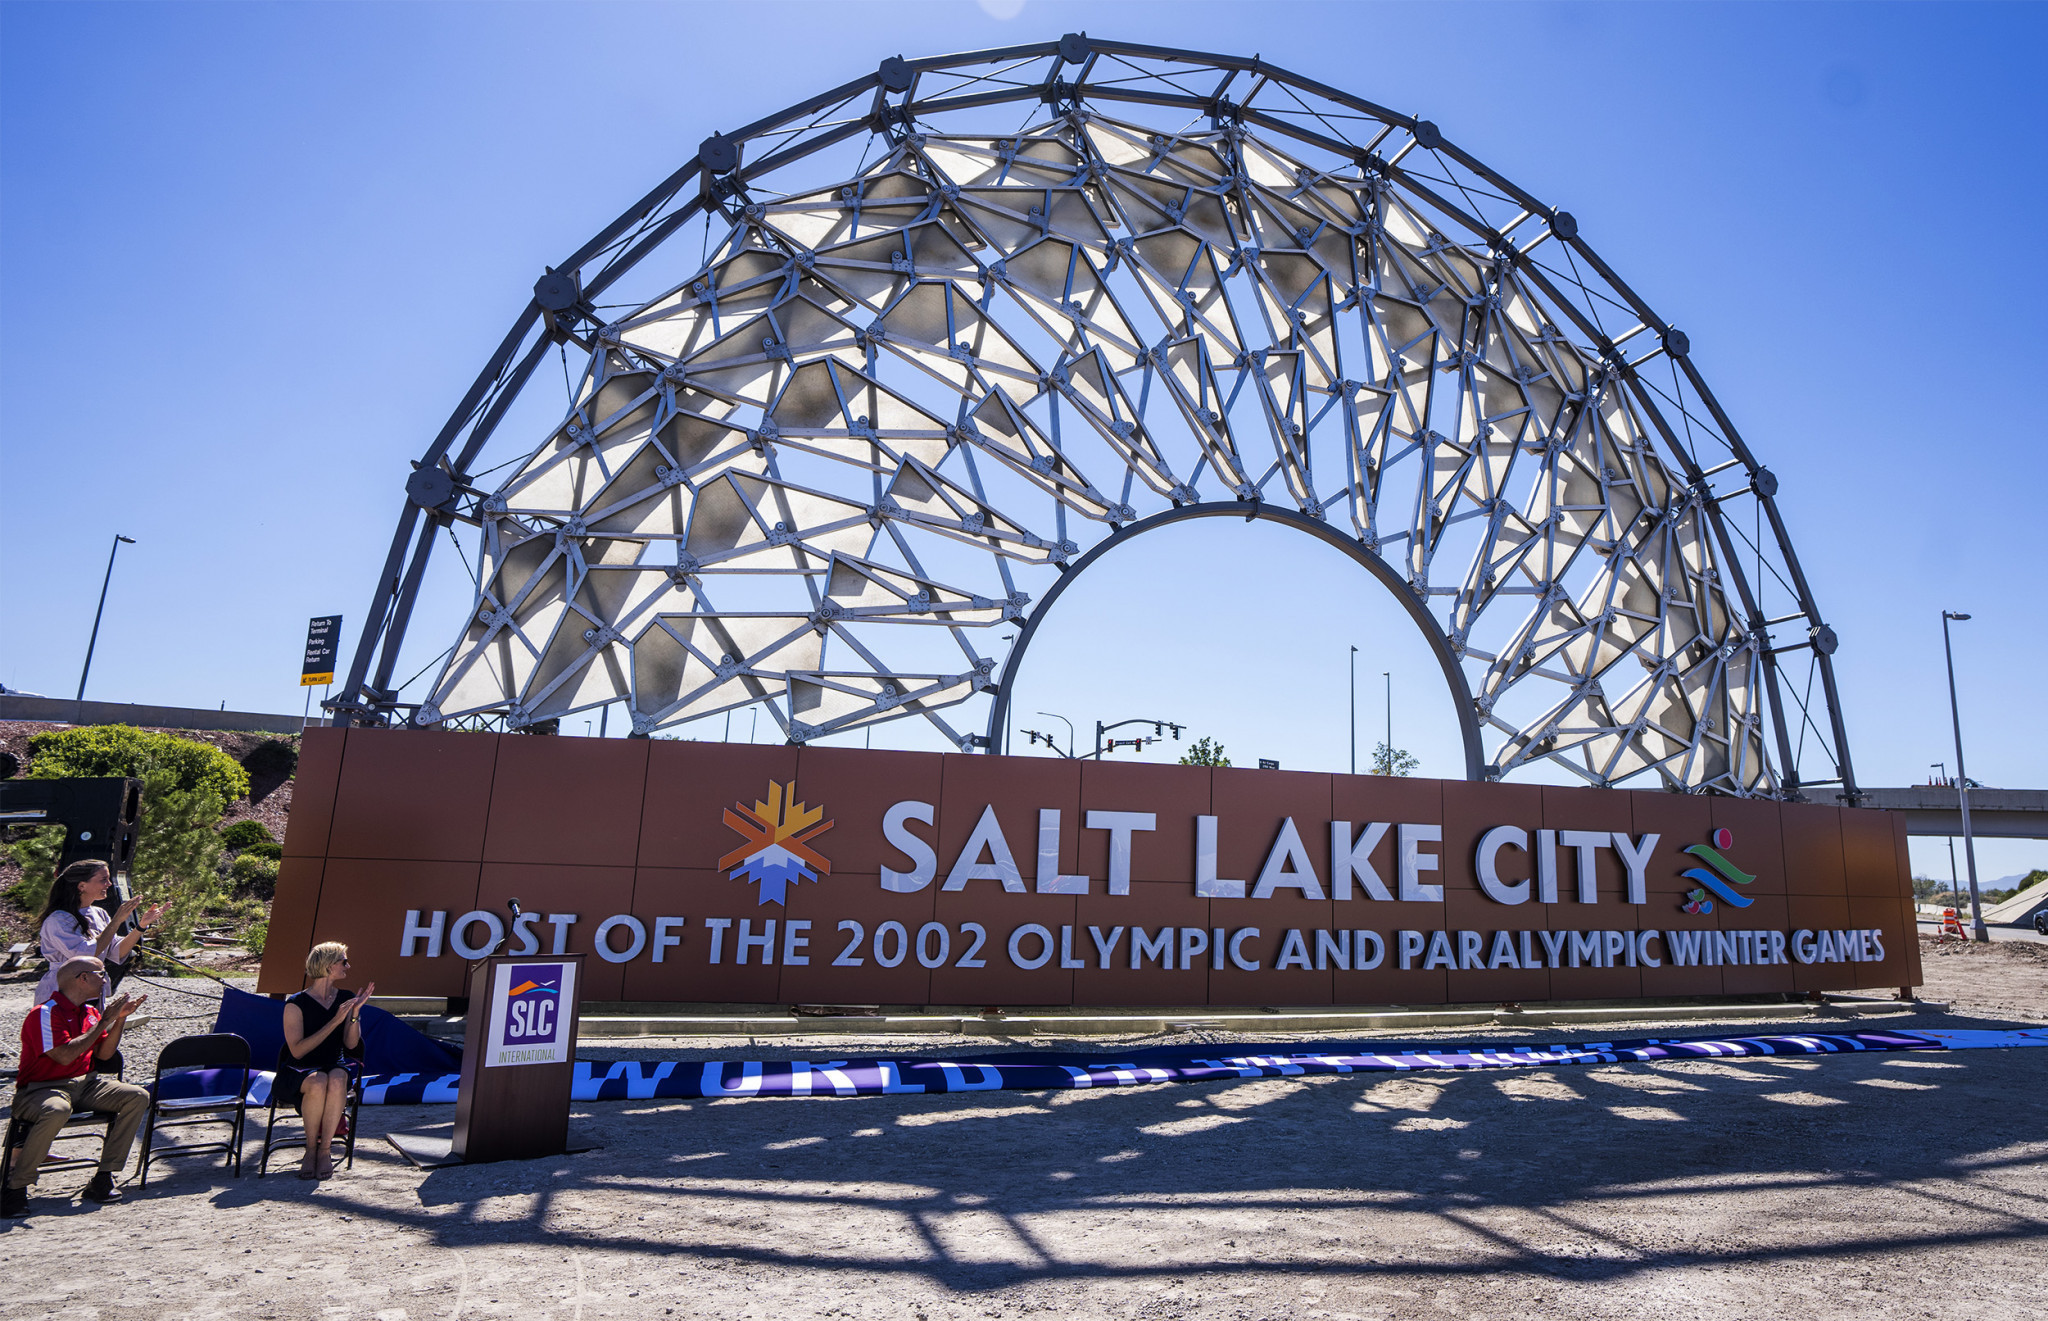 Salt Lake City 2002 arch placed at airport as inspiration for future Winter Olympics bid